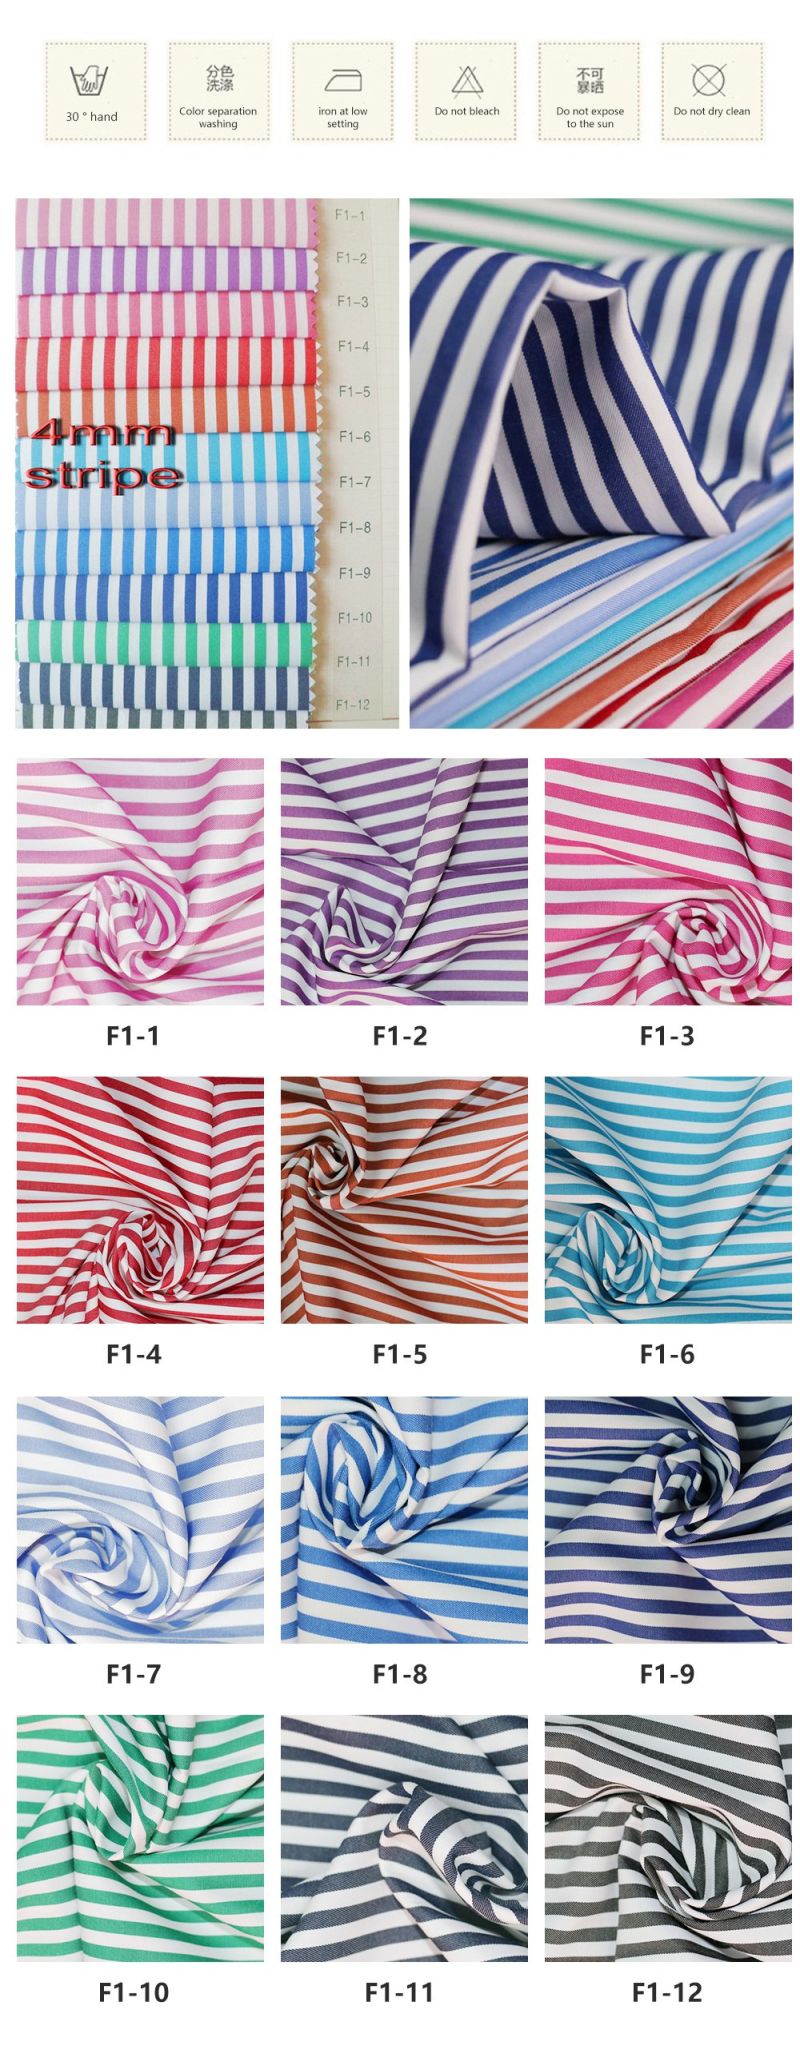 Stripe Fabric 45% Cotton 55% Polyester Light 46GSM Fabric for Shirt Dress Clothes Home Textile